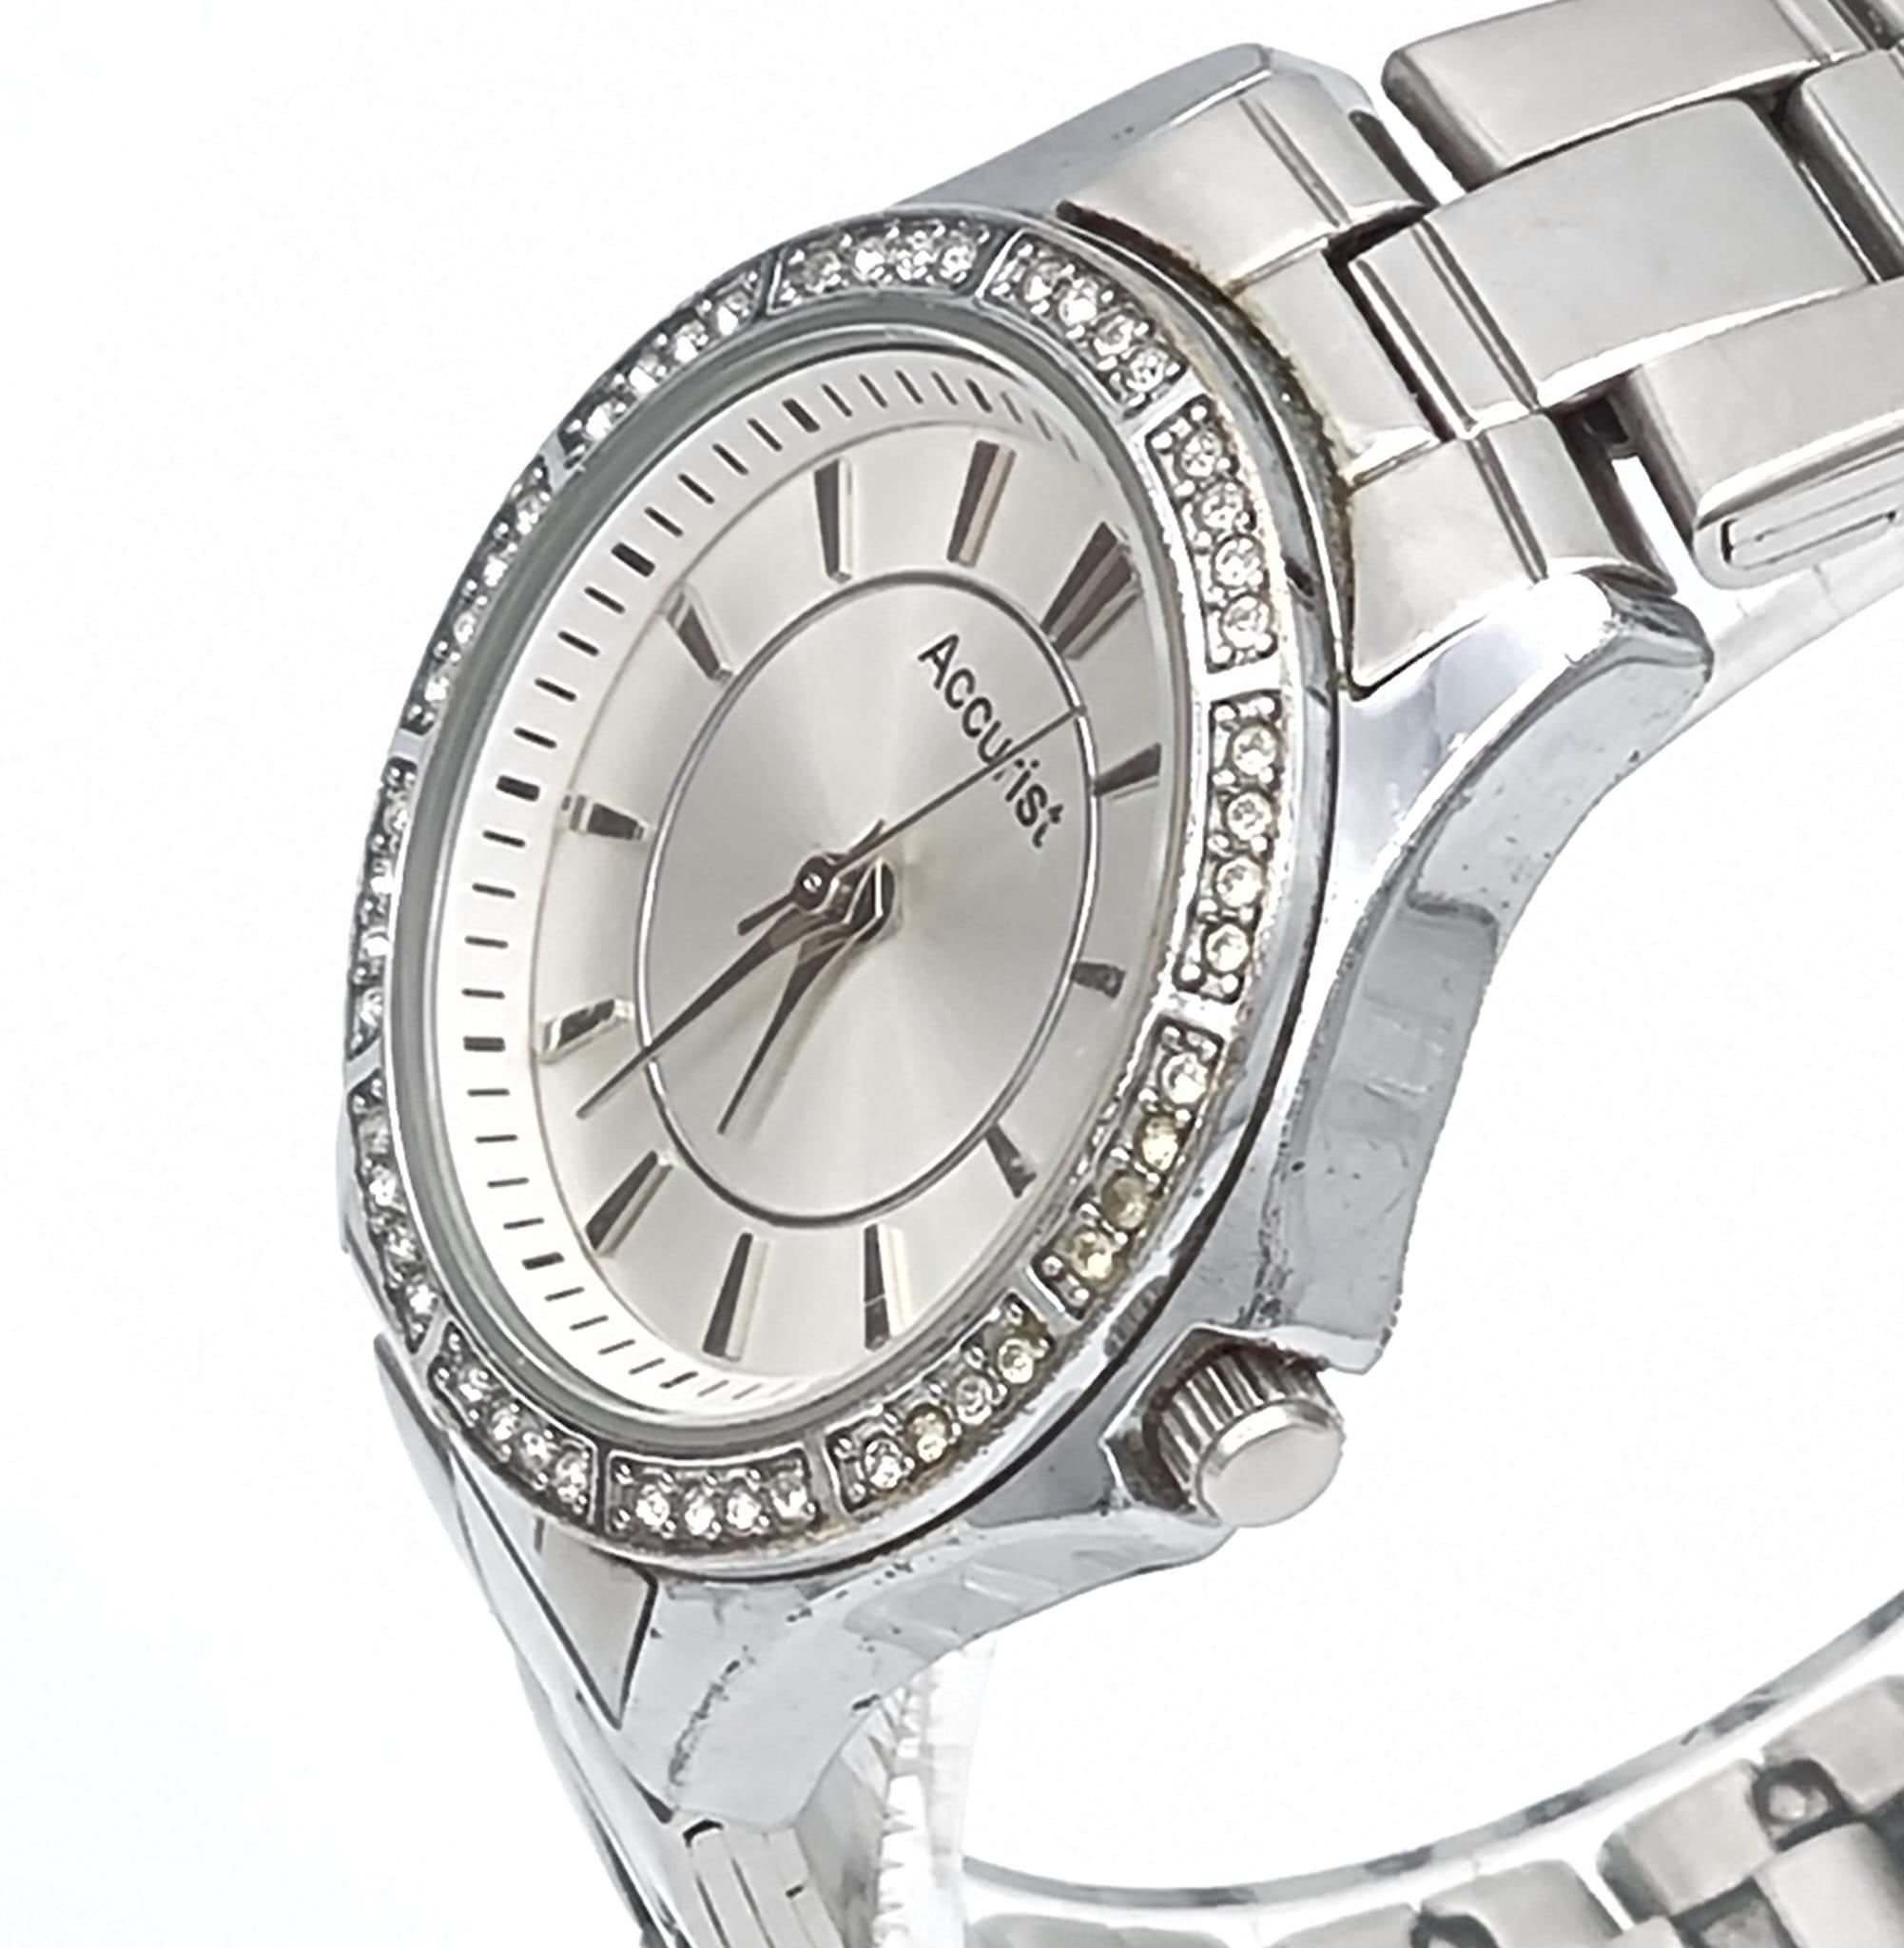 A Quality Accurist Ladies Diamonte Watch. Stainless steel strap and case - 28mm. Silver tone dial. - Image 3 of 10